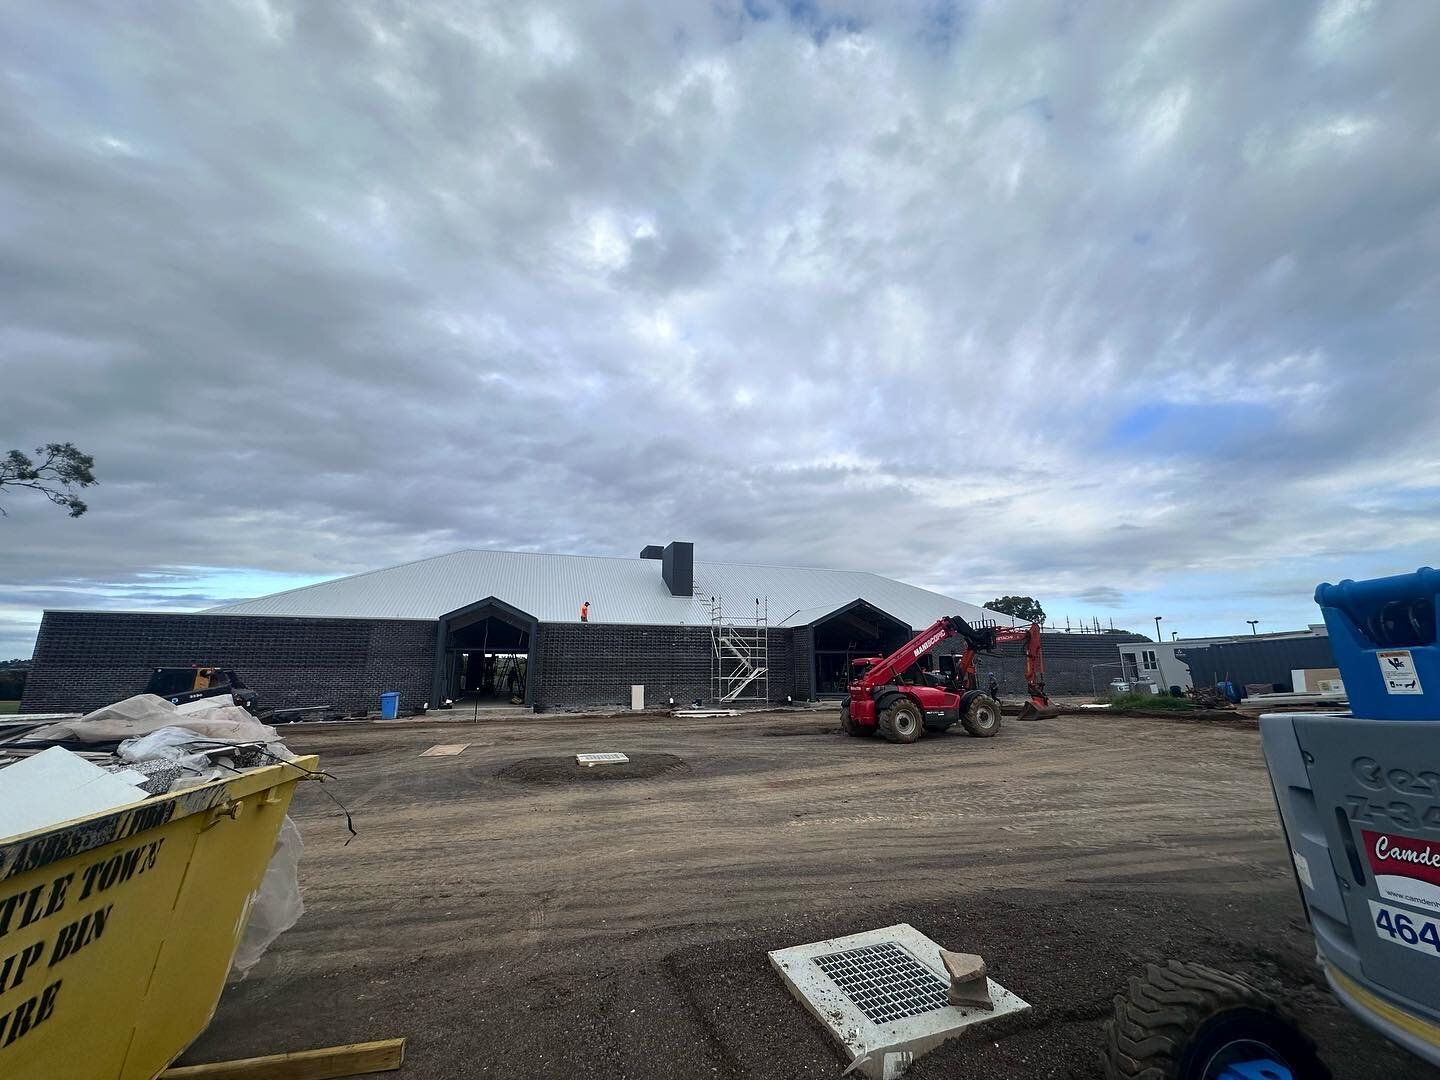 The boys at Harden are showing us the ✨glamorous✨ side of tradie life: being surrounded by big machinery, piles of boxes and bins, and exposed ceilings while mid construction. 
All that aside, Harden Country Club is shaping up to be a spectacular ven